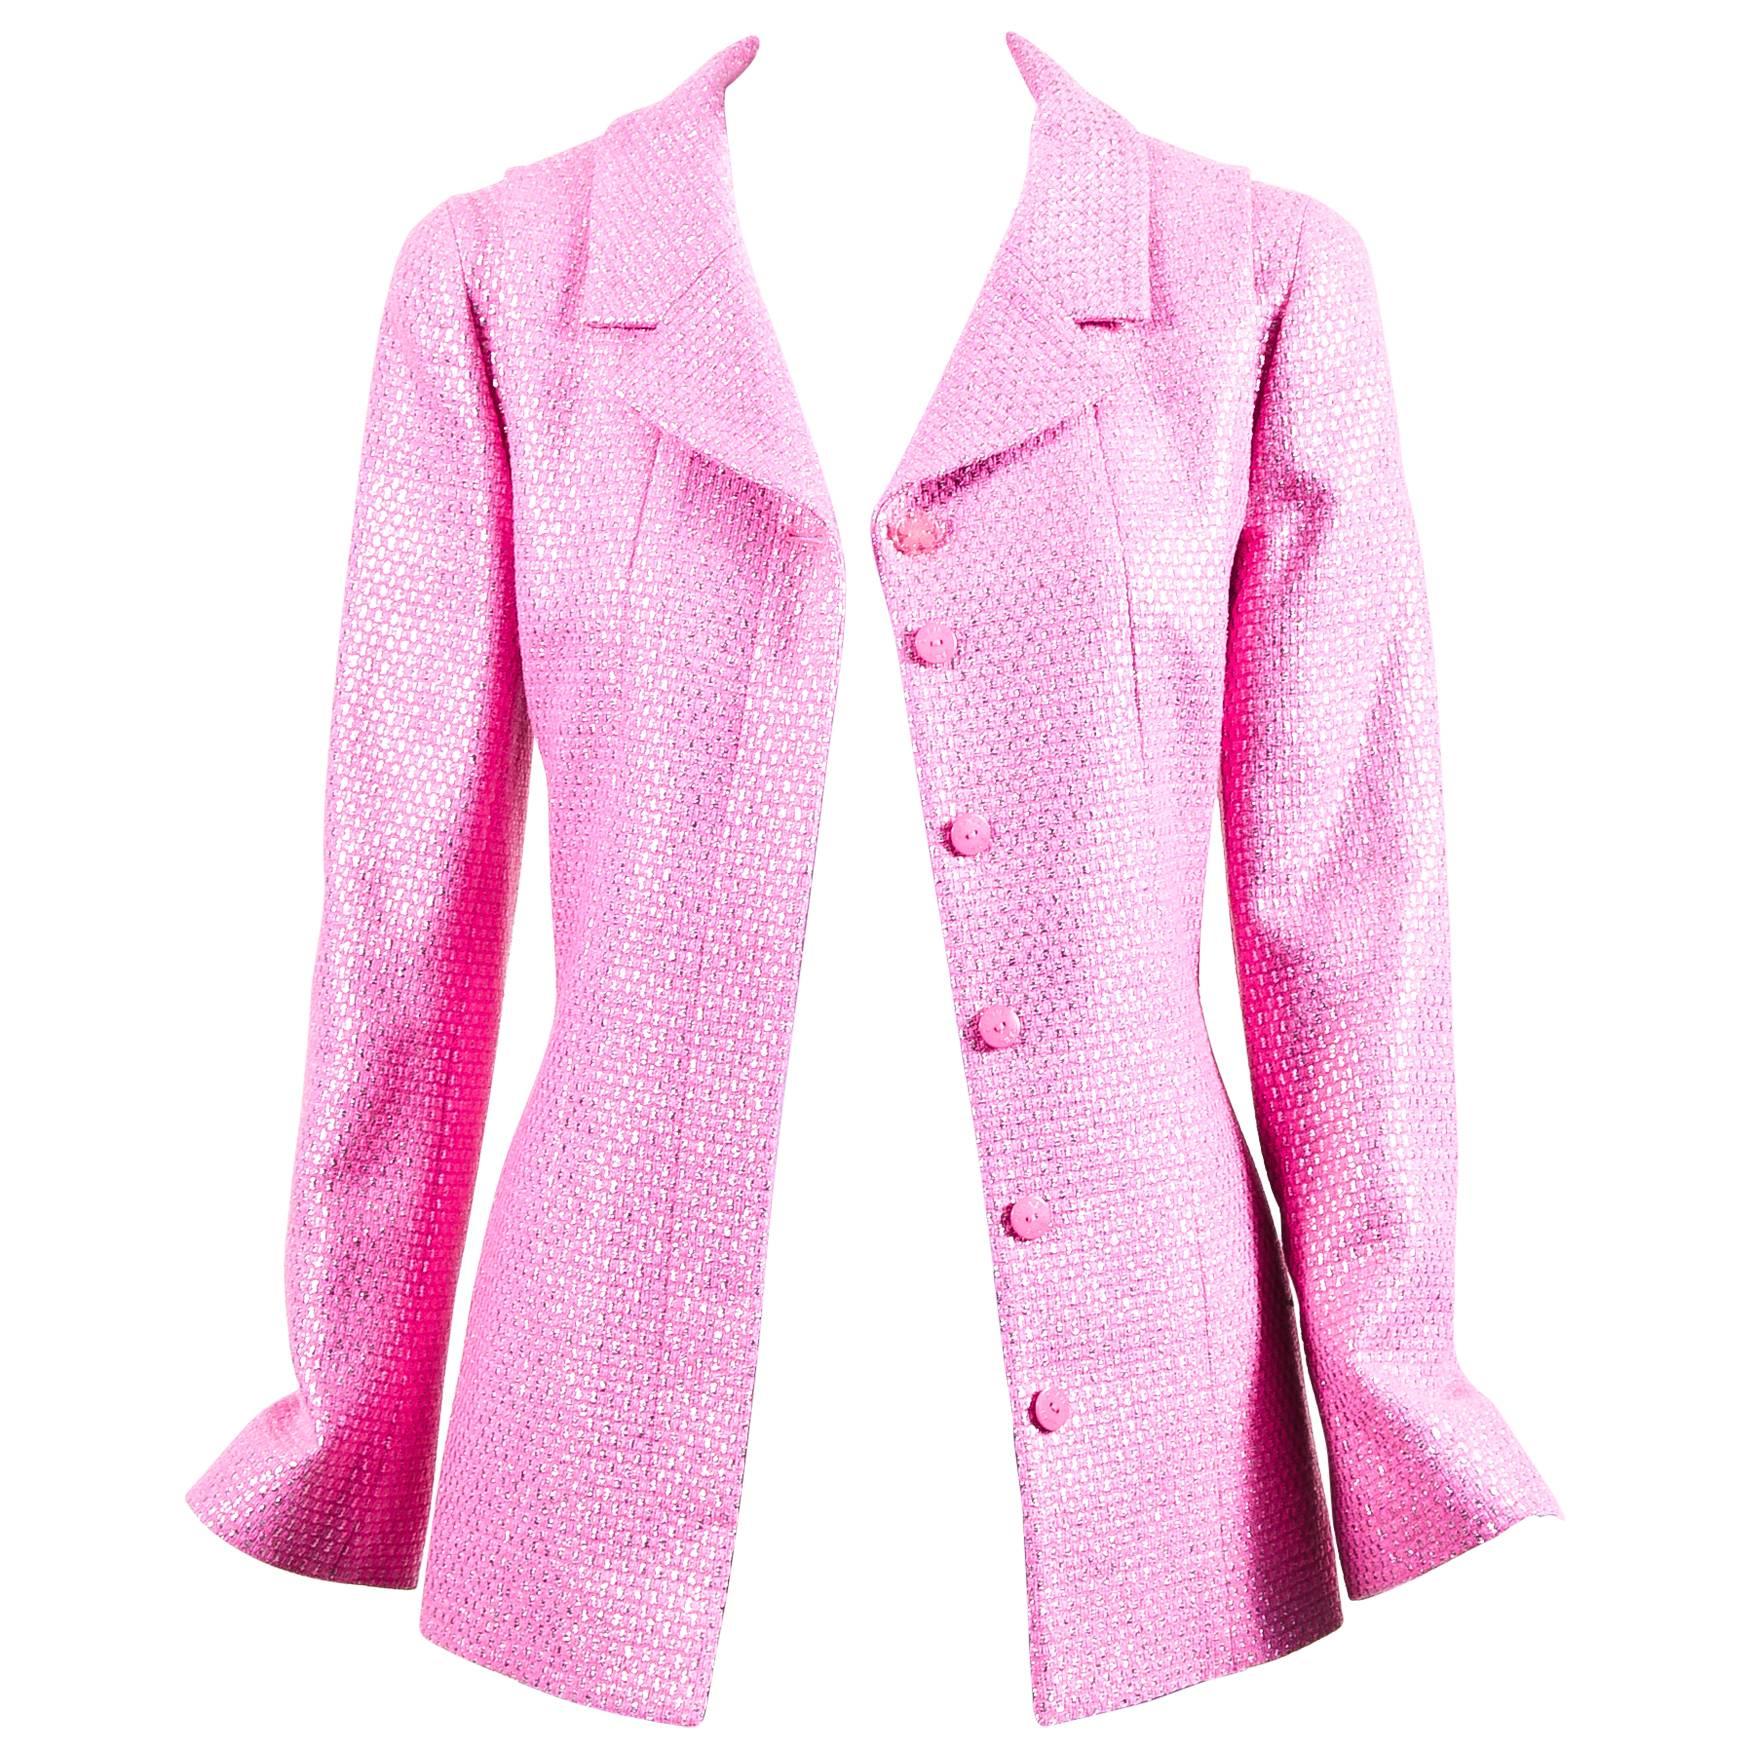 Chanel Bubblegum Metallic Pink Collared LS Buttoned Jacket SZ 40 For Sale